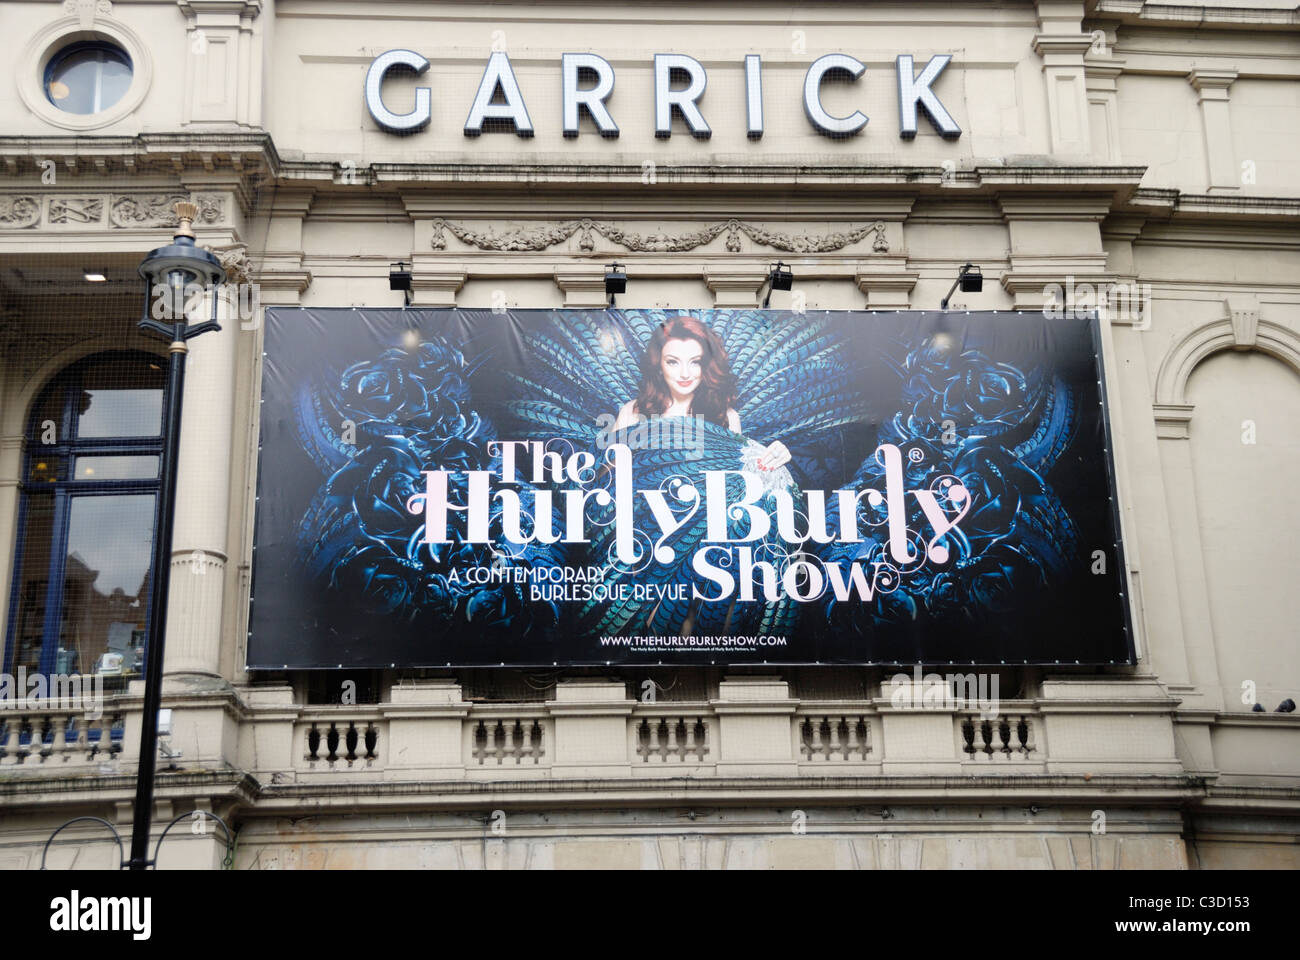 Billboard promoting the Hurly Burly Show, burlesque-inspired revue, London, England Stock Photo